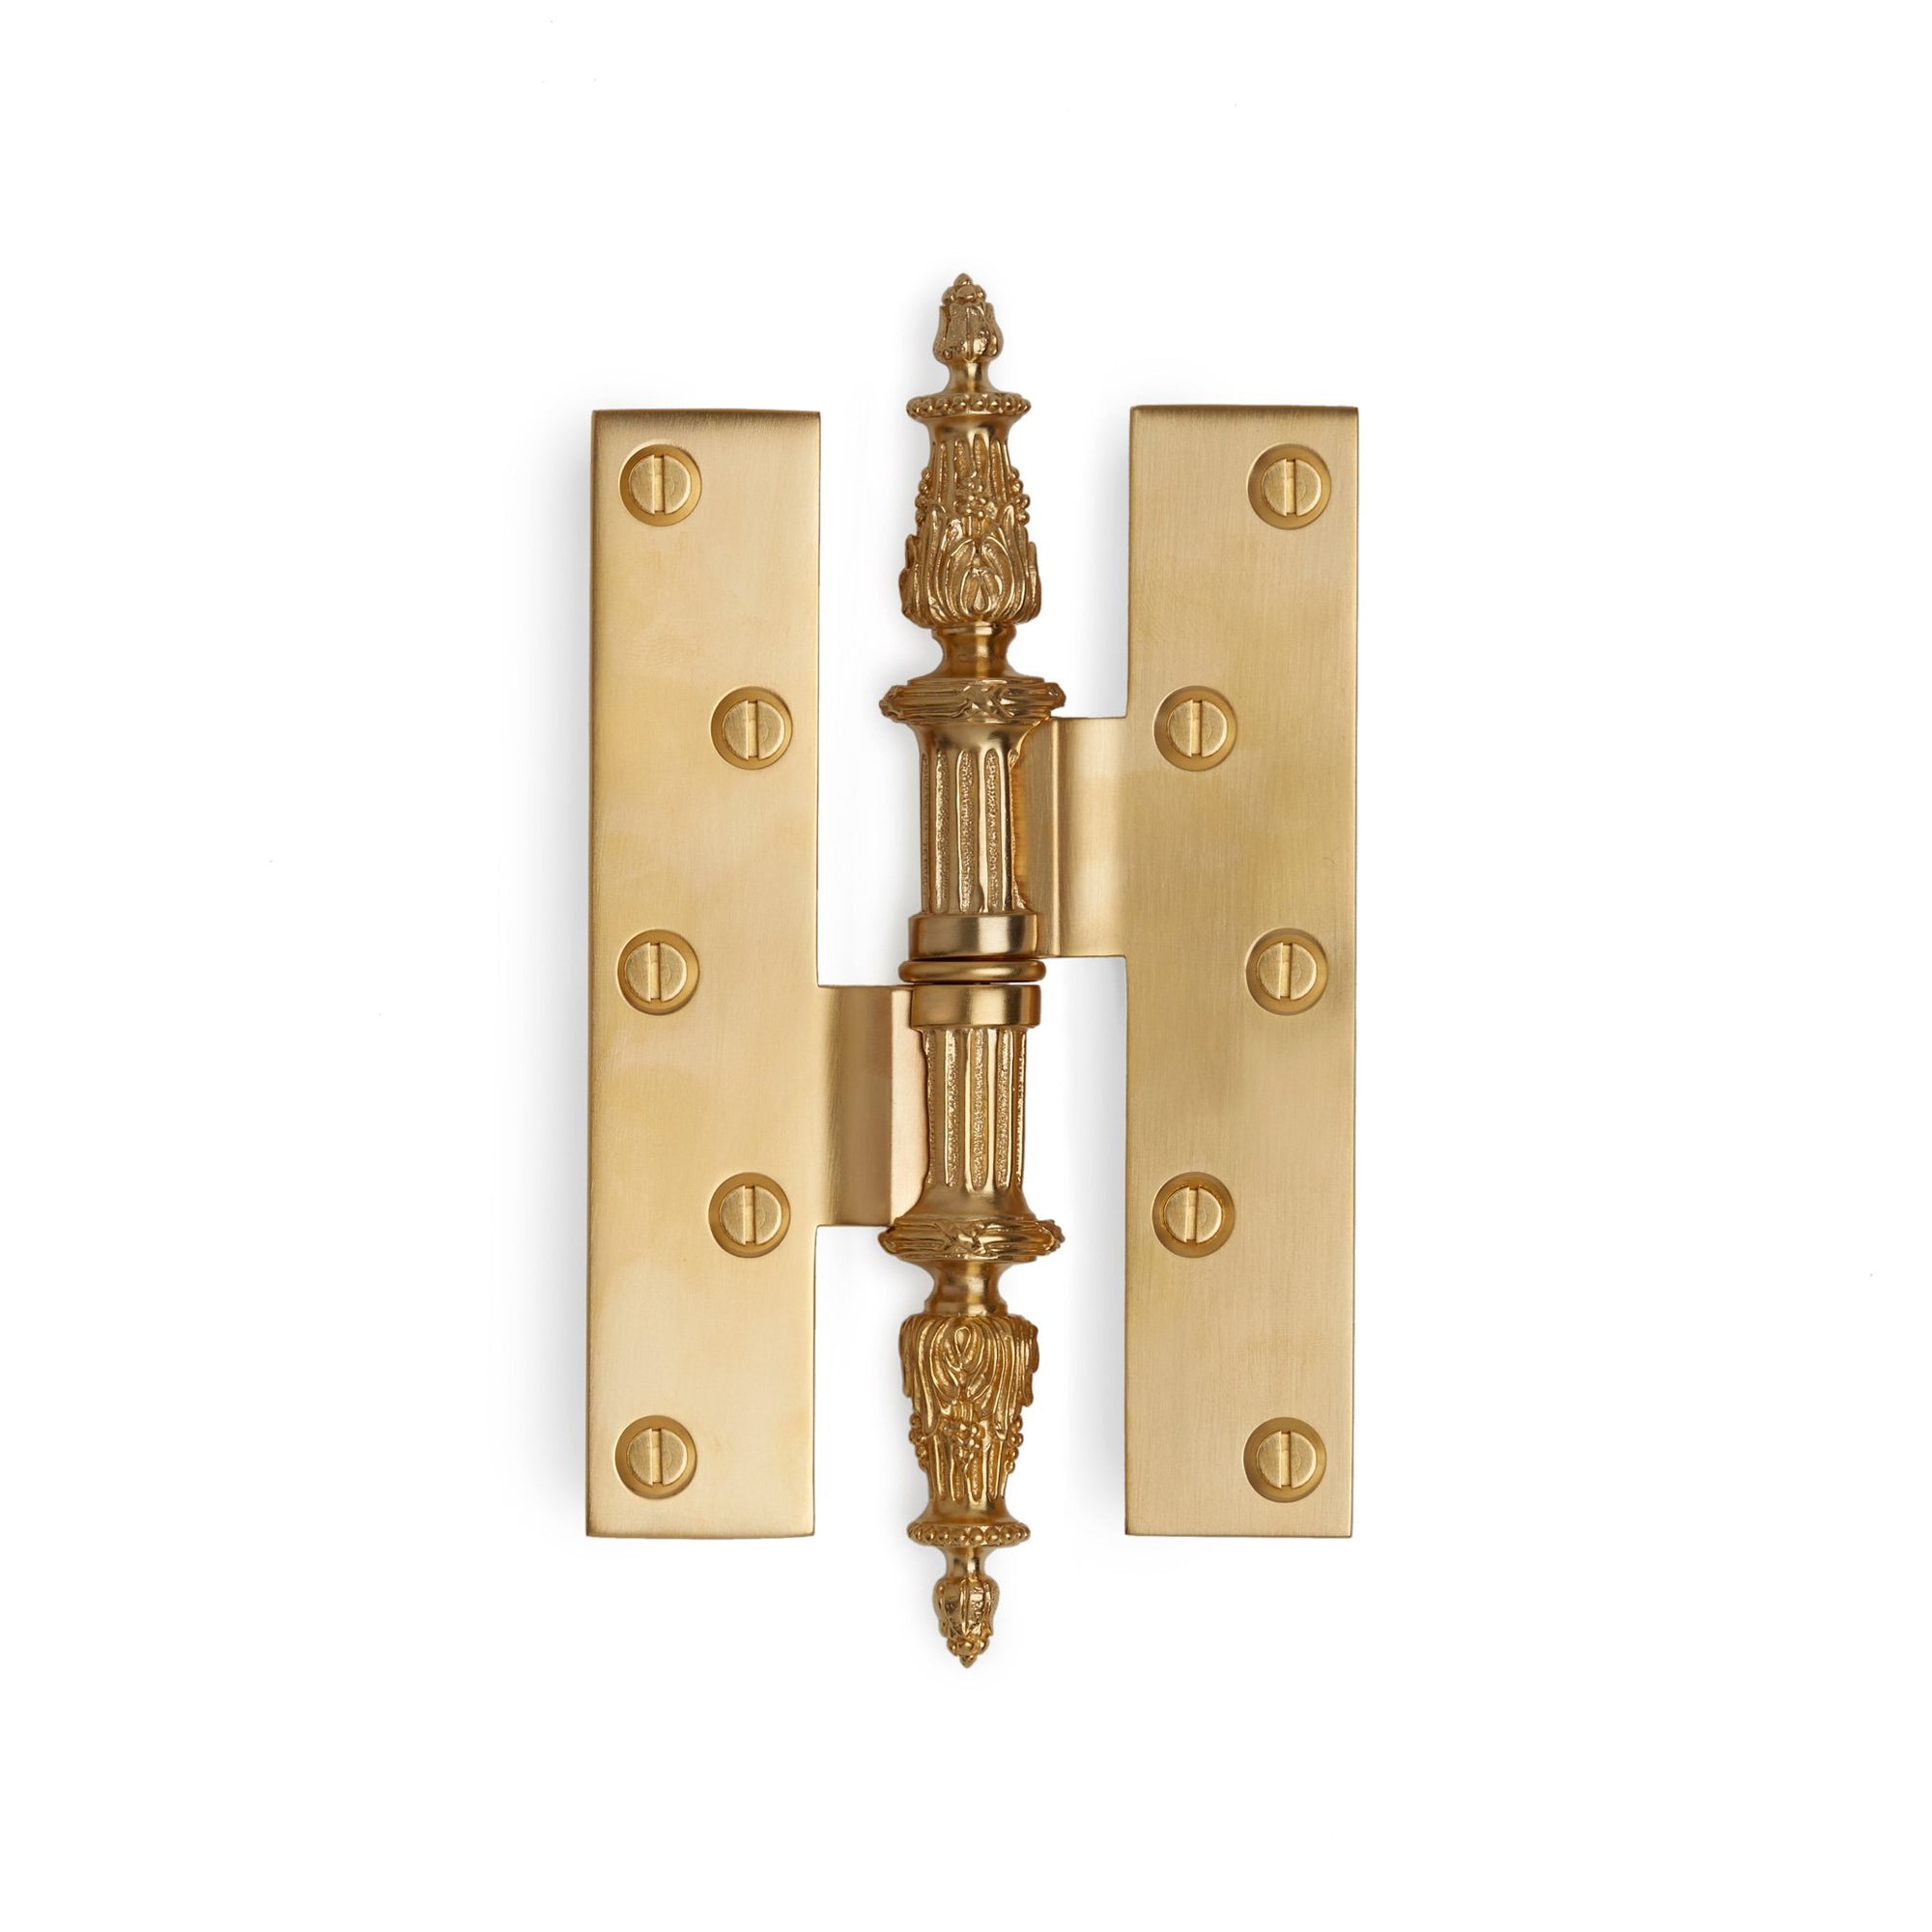 1036-114-ZZ-GP Sherle Wagner International Louis Seize Paumelle Hinge in Gold Plate metal finish